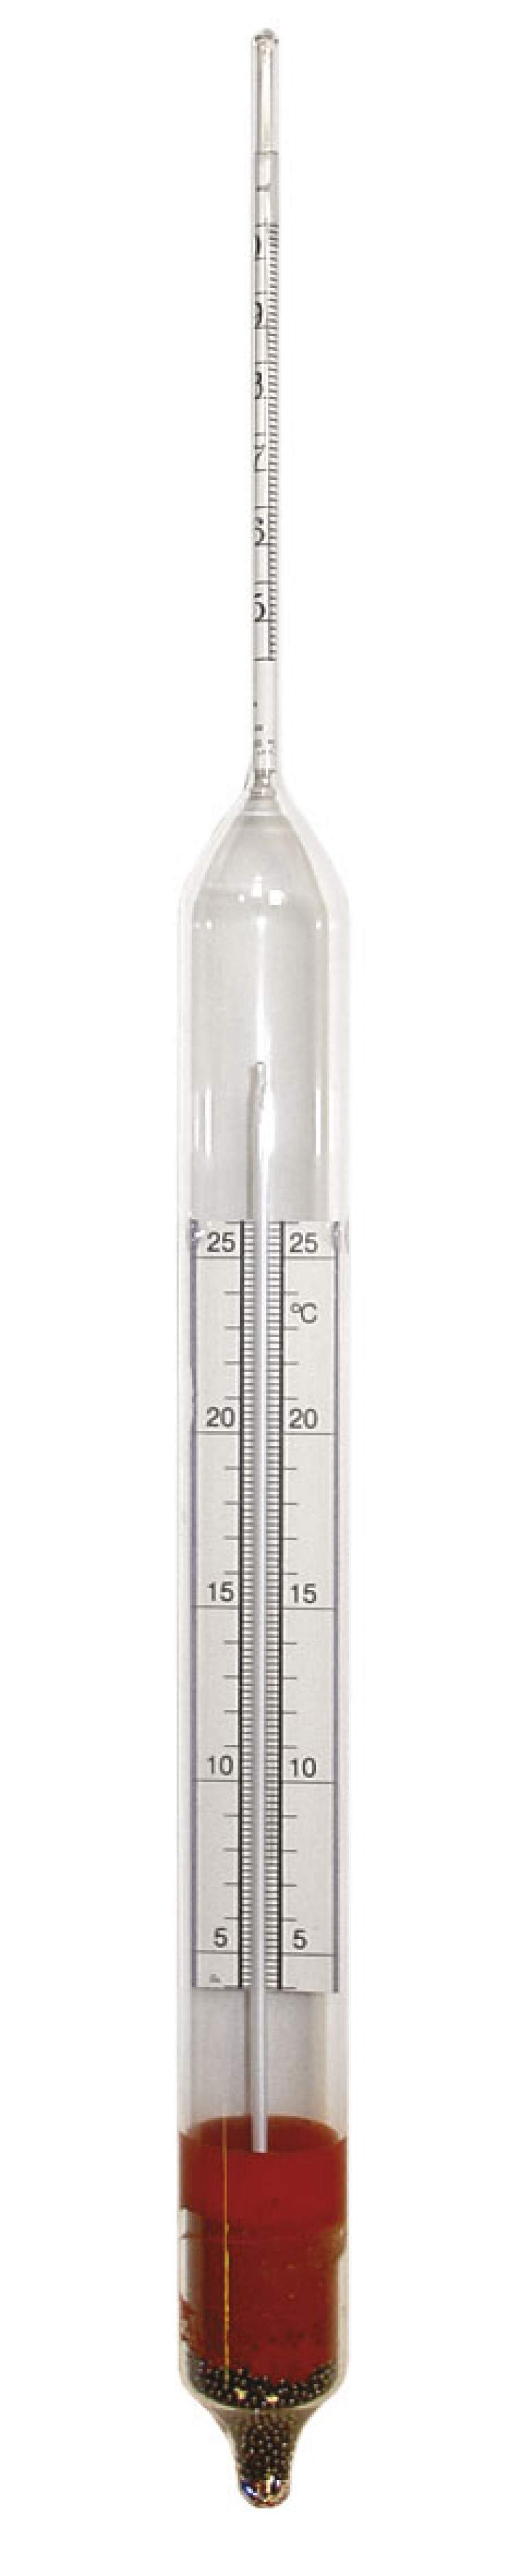 Alcoholmeter 15-20% for ALCODEST